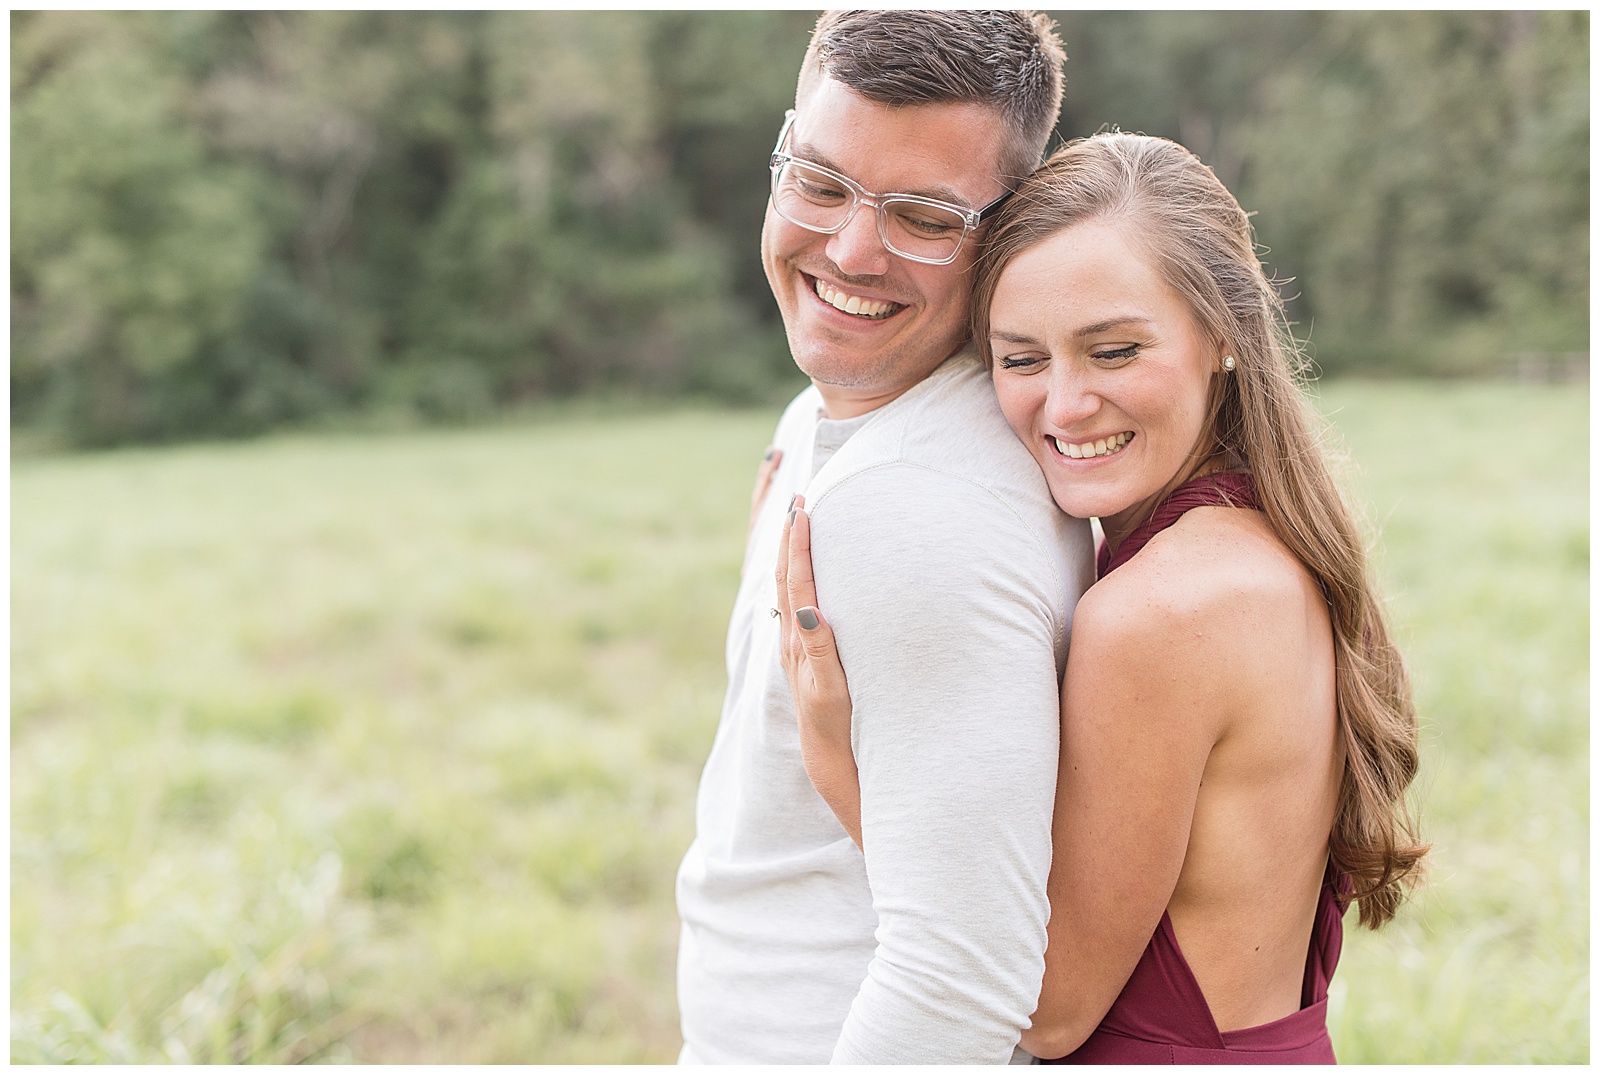 close up photo of the couple standing in grass field with trees behind them and they are both facing the left side of the photo with the guy on the left and his back to the girl and she is resting her right side of her face against the guy's back and left side of his face and they are both smiling and looking down towards the ground and the girl has her arms wrapped through the guy's arms at Hibernia County Park in Chester County, PA